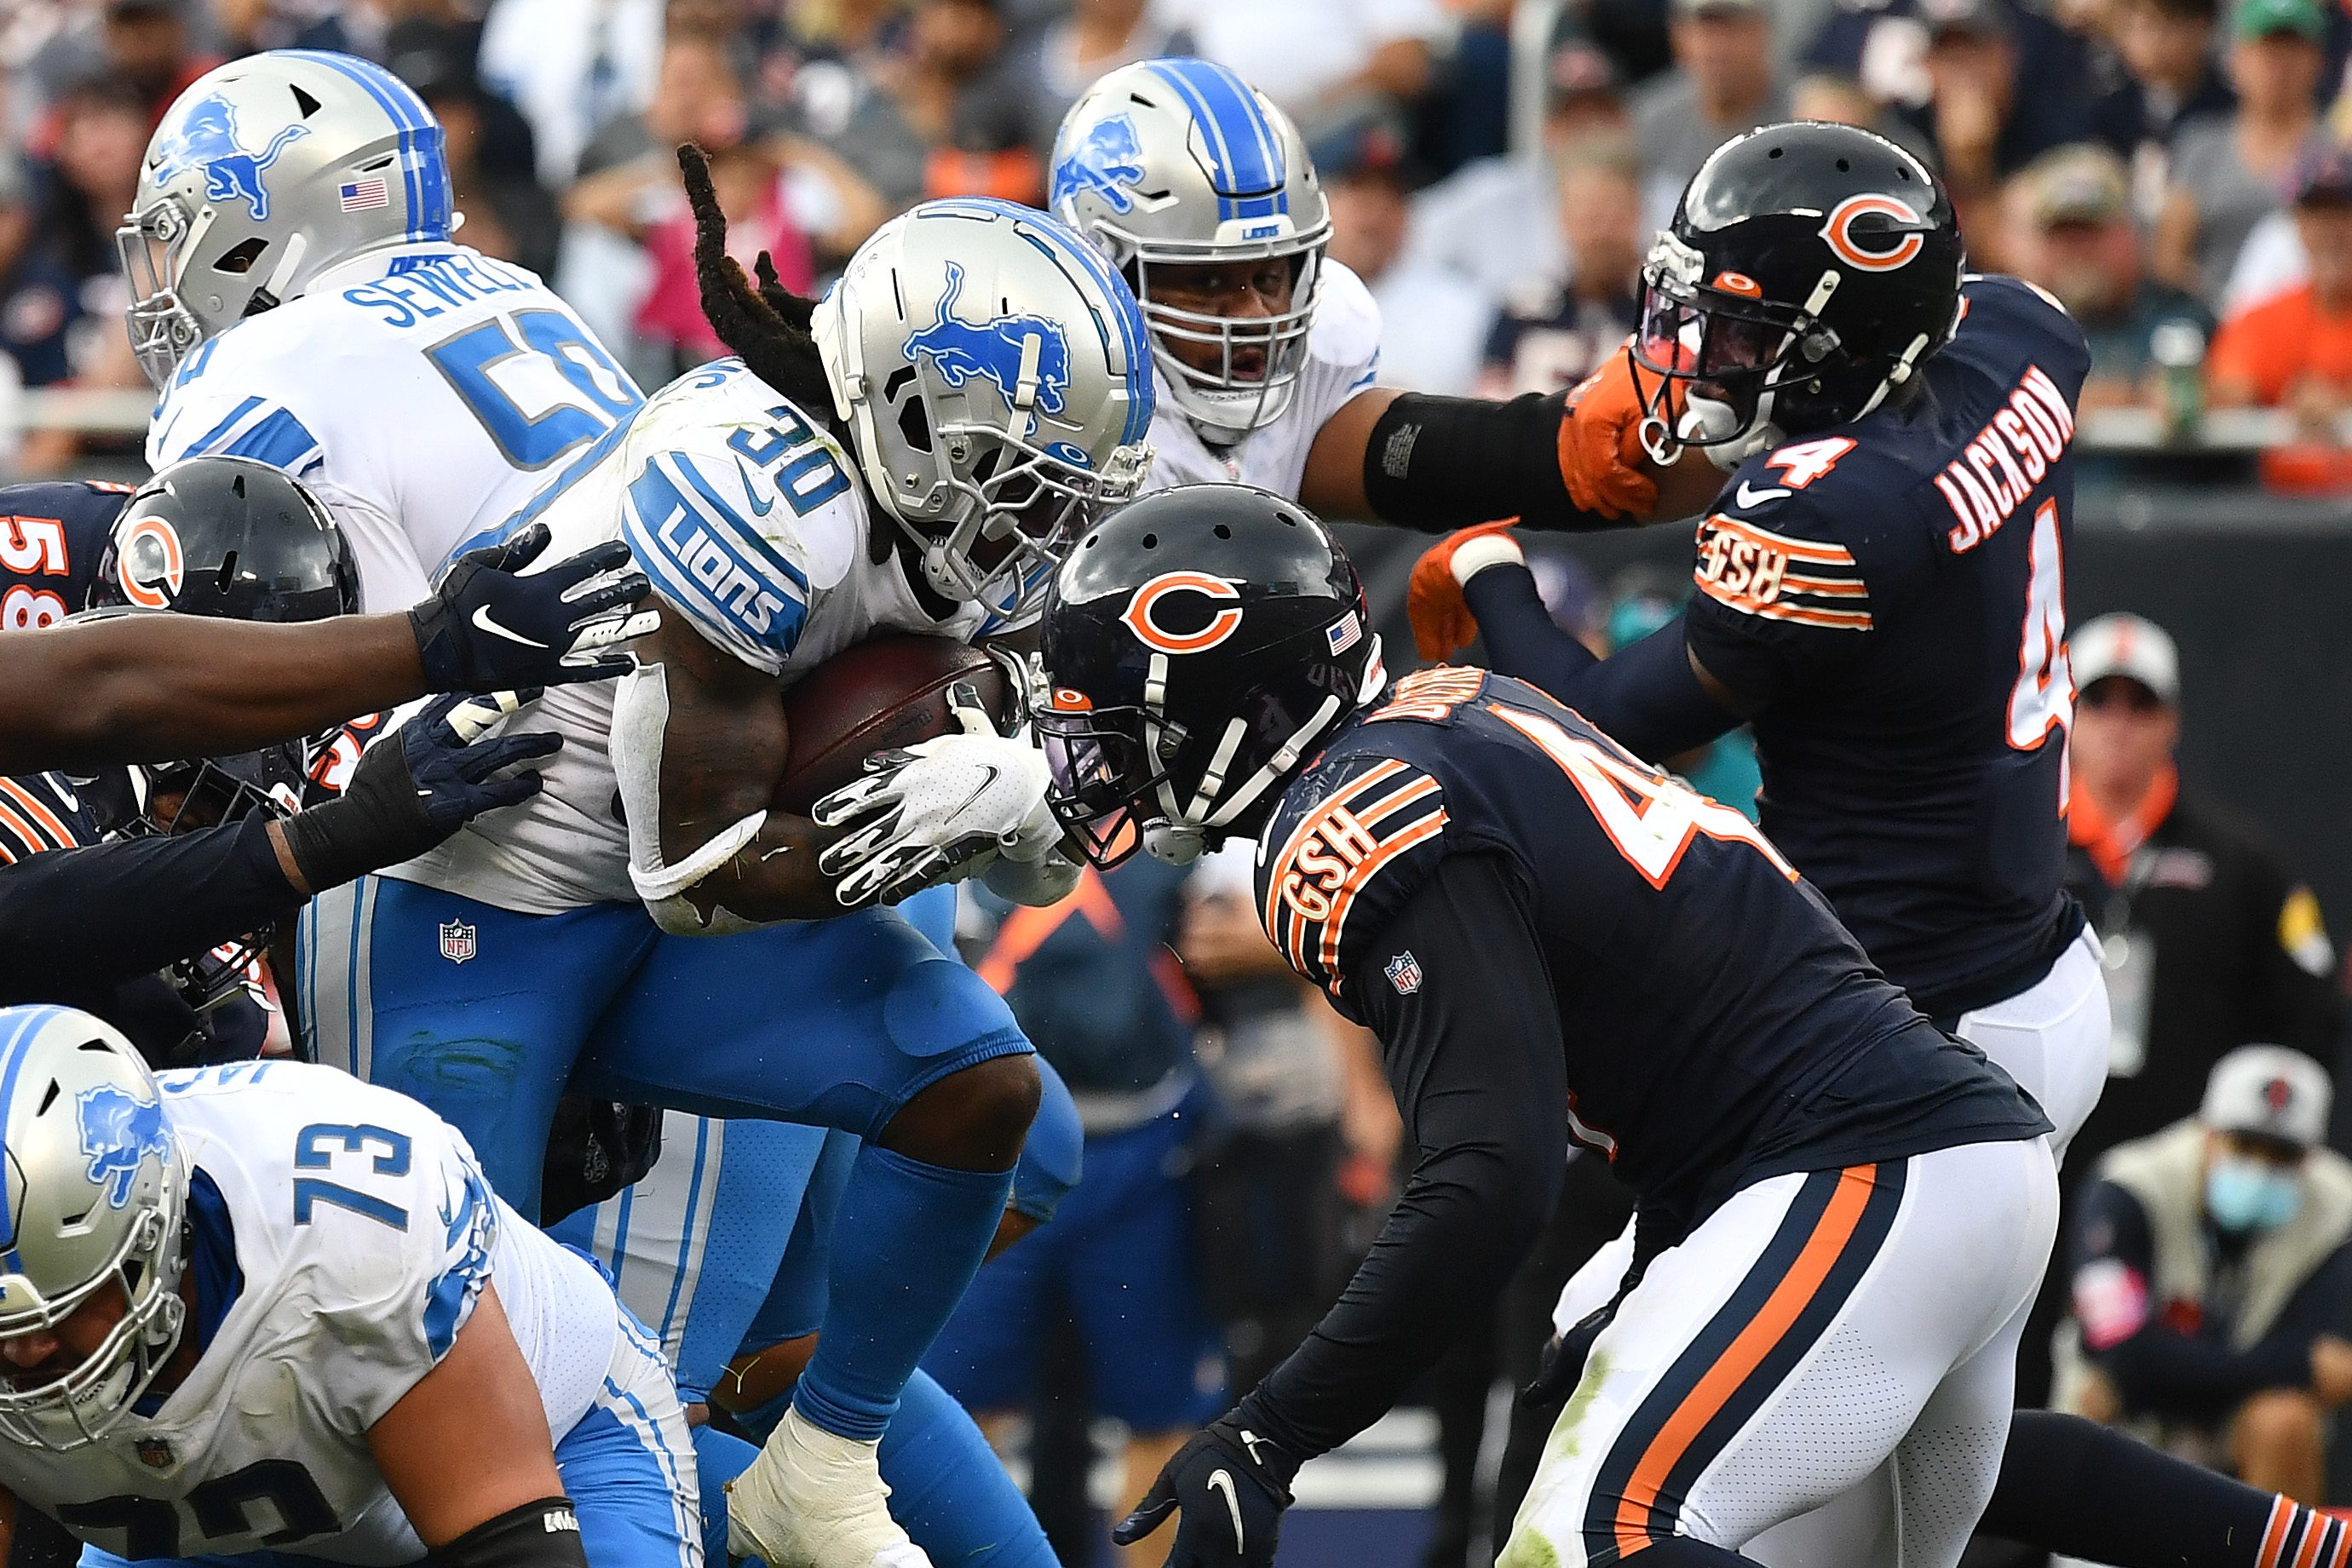 Bears-Lions on Thanksgiving Is a Very Unappetizing NFL Footbal